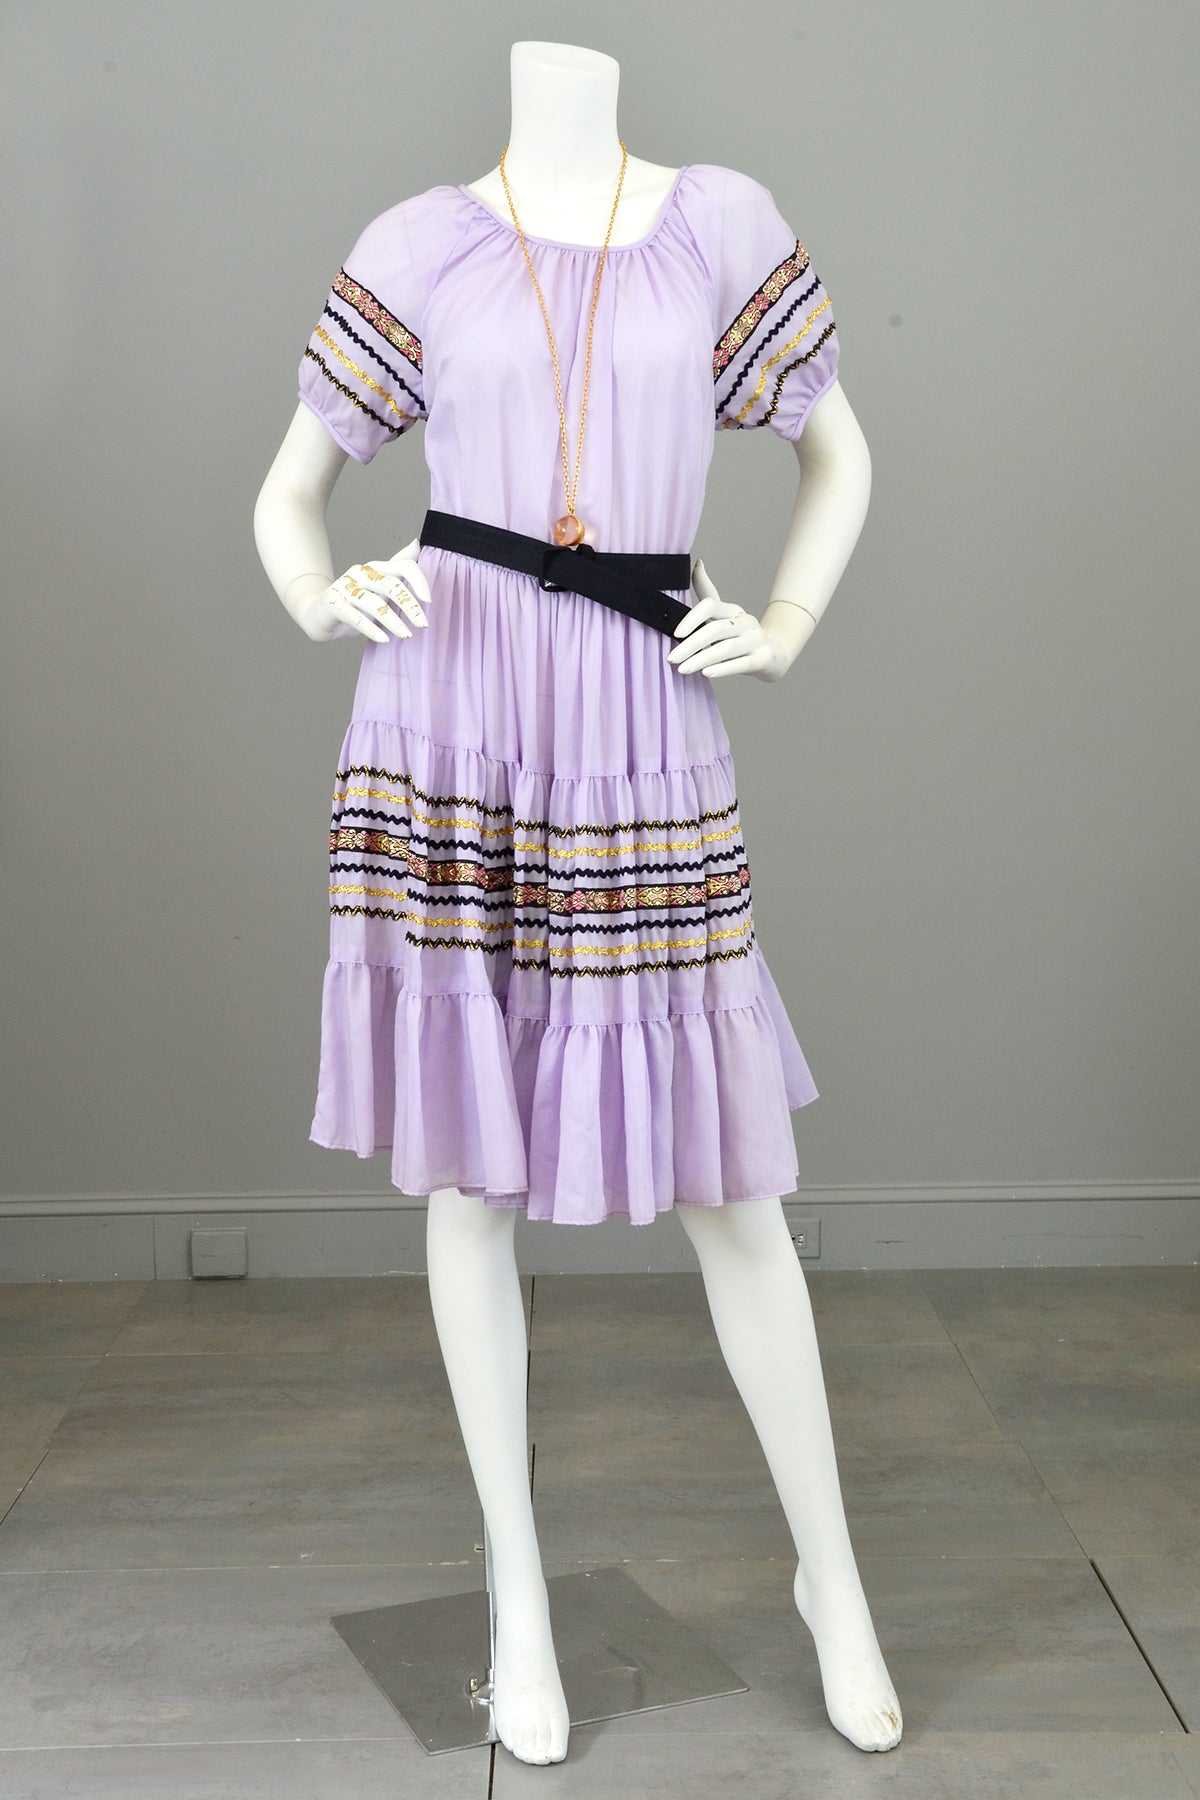 Vtg 1960s 70s Lilac Patio Square Dance Dress Trimmed with Gold Metallic Ribbon and Black & Gold Rickrack | Full Skirt Square Dance Dress | Patio Dress